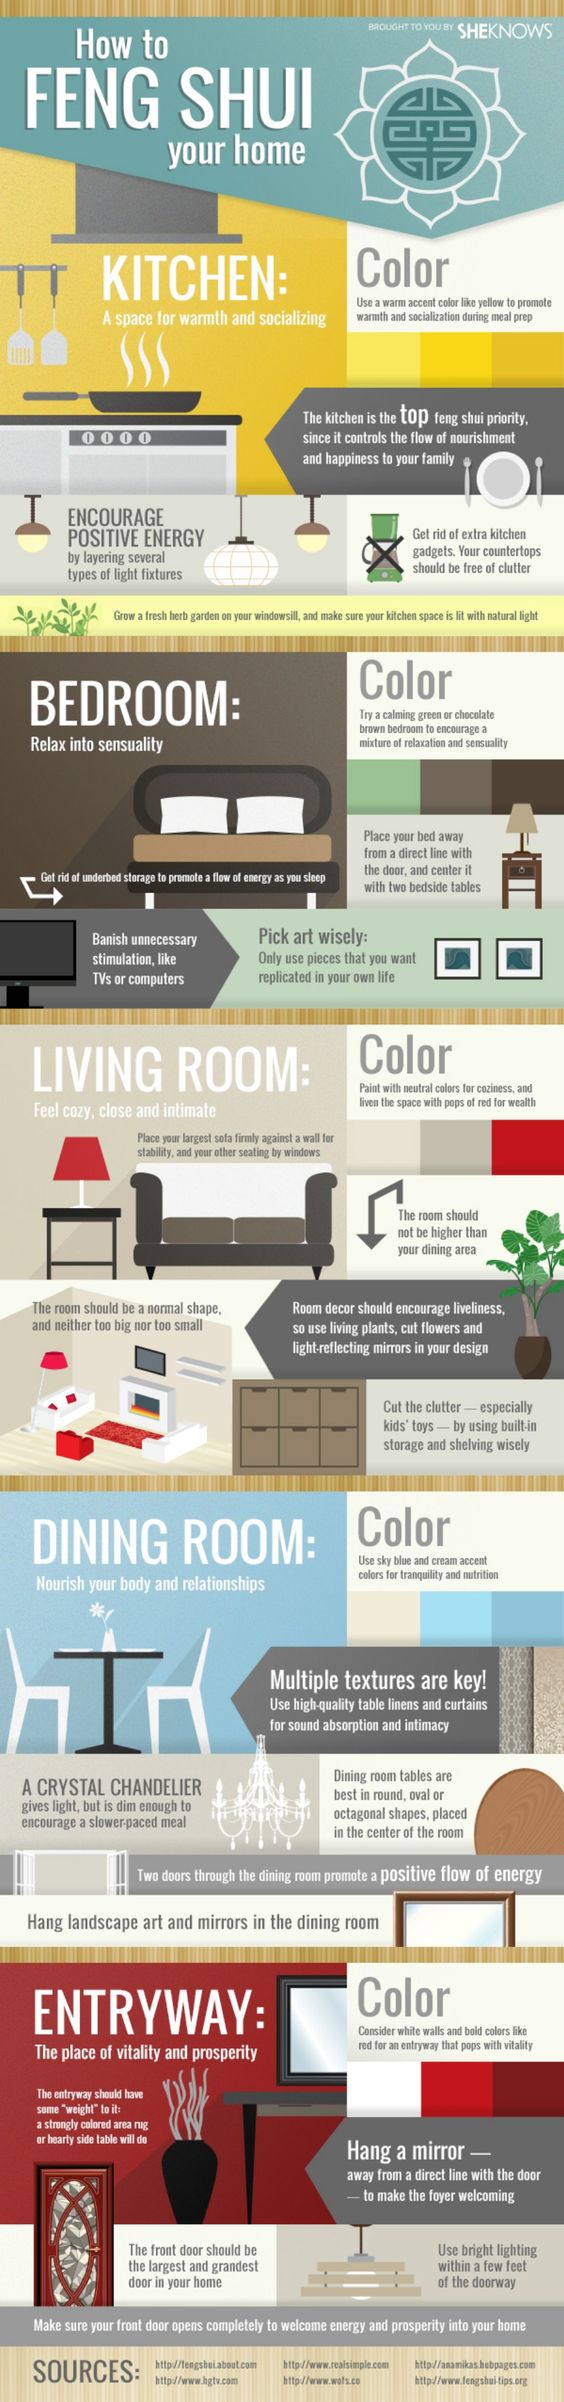 42. How to Feng Shui Your Home - 50 Amazingly Clever Cheat Sheets To Simplify Home Decorating Projects